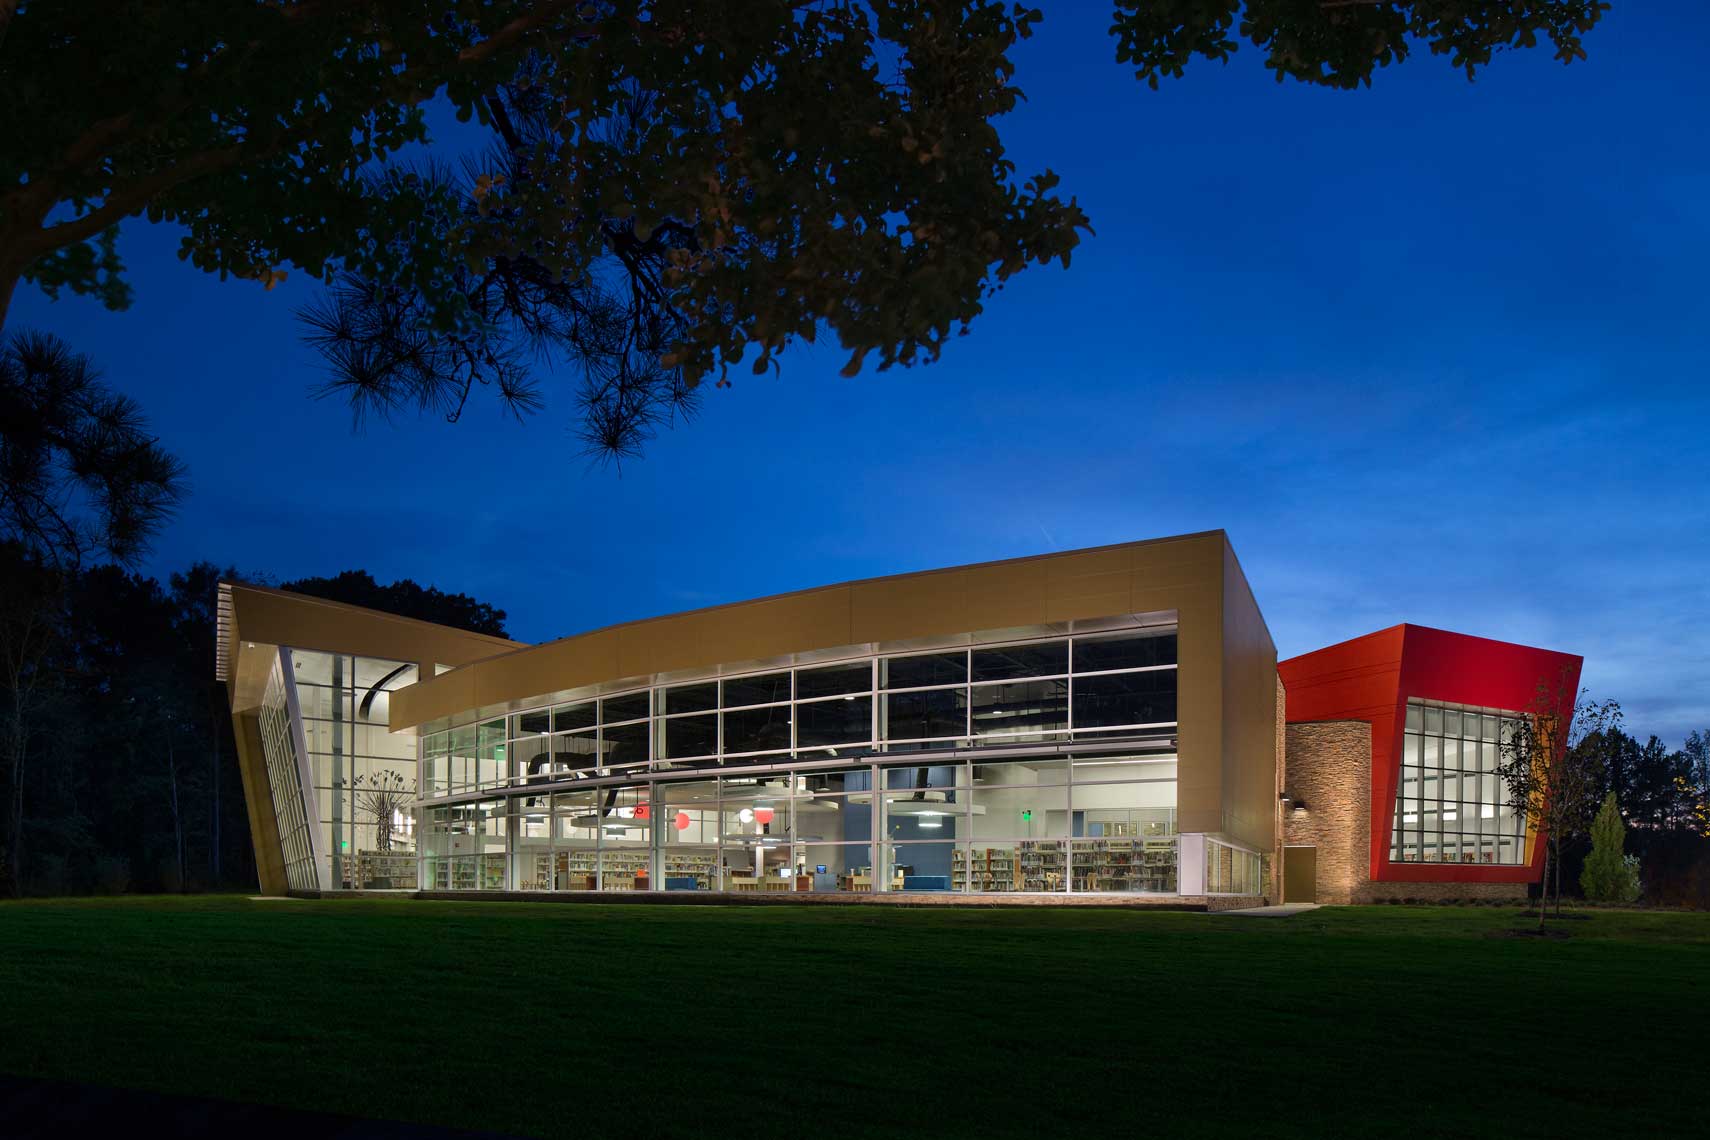 A twilight view of the Wolf Creek Library showing both interior and exterior architectural details